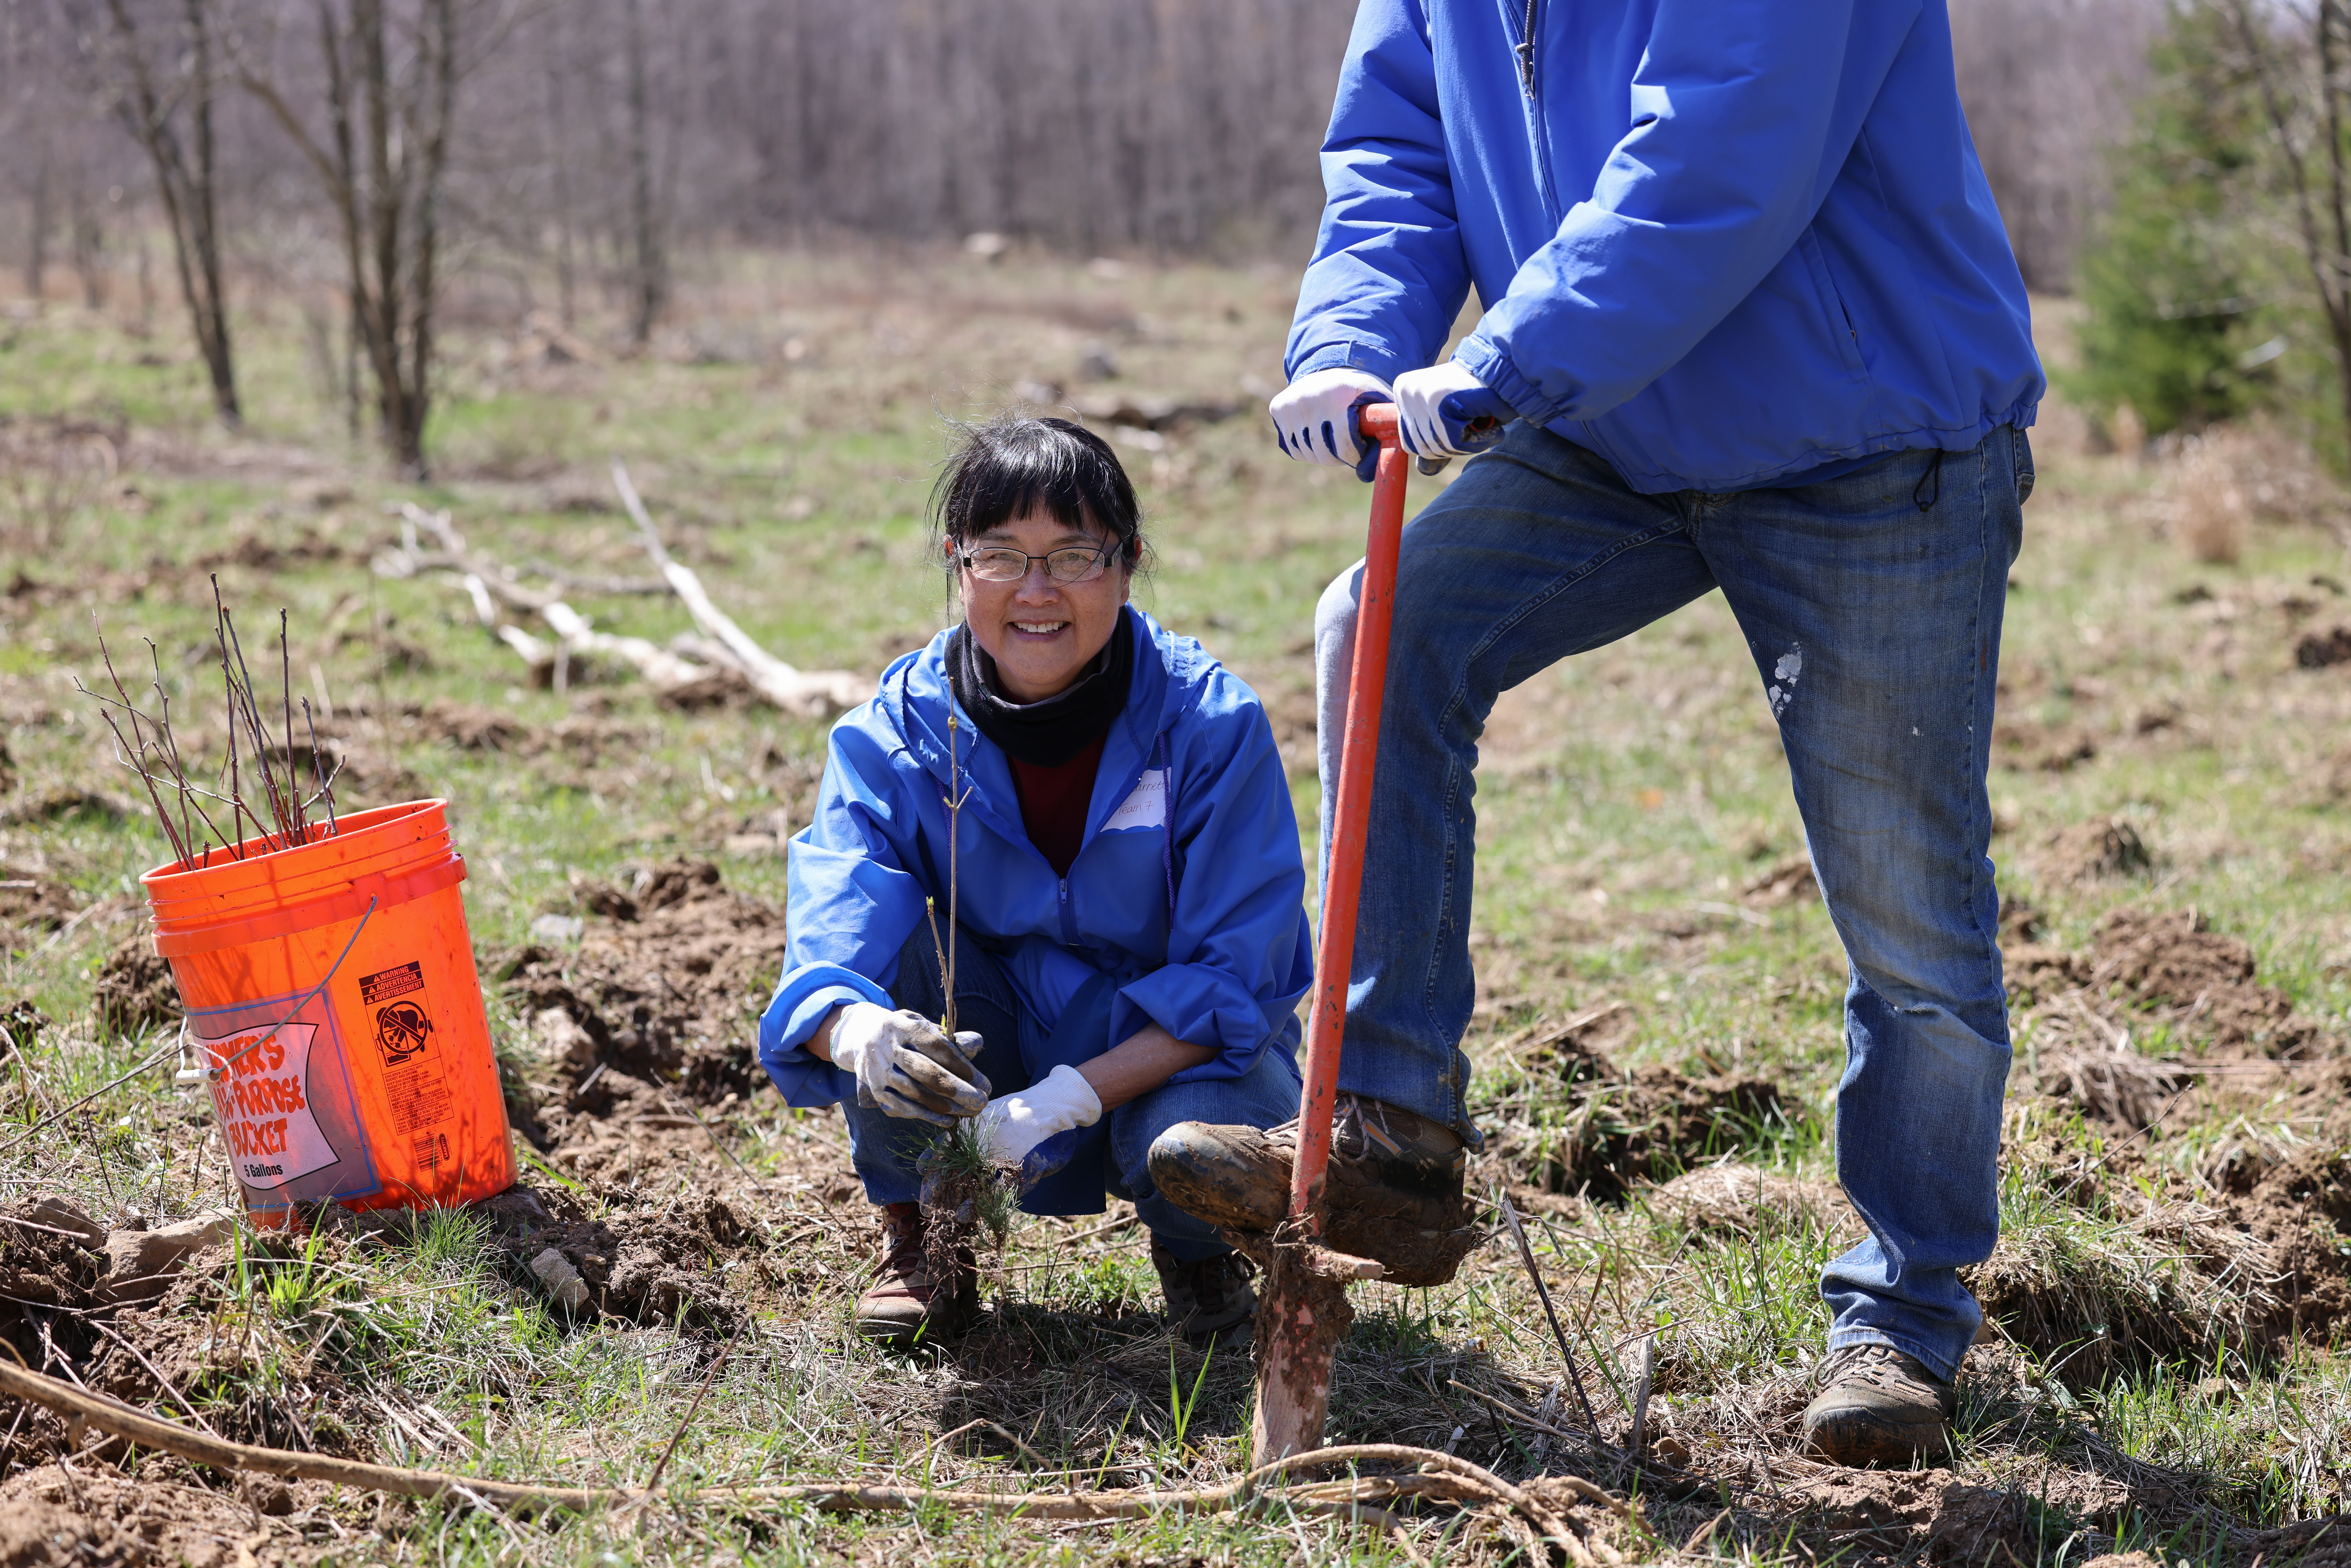 Ginny Barnett, a volunteer, plants a tree at the Plant a Tree at Flight 93 event at the Flight 93 National Memorial, Somerset County, Pennsylvania, April 22, 2022. The event highlighted more than 10 years of work and events to plant over 150,000 trees, across 214 acres of former coal mine land. (Photo courtesy of NPS/B. Torrey)